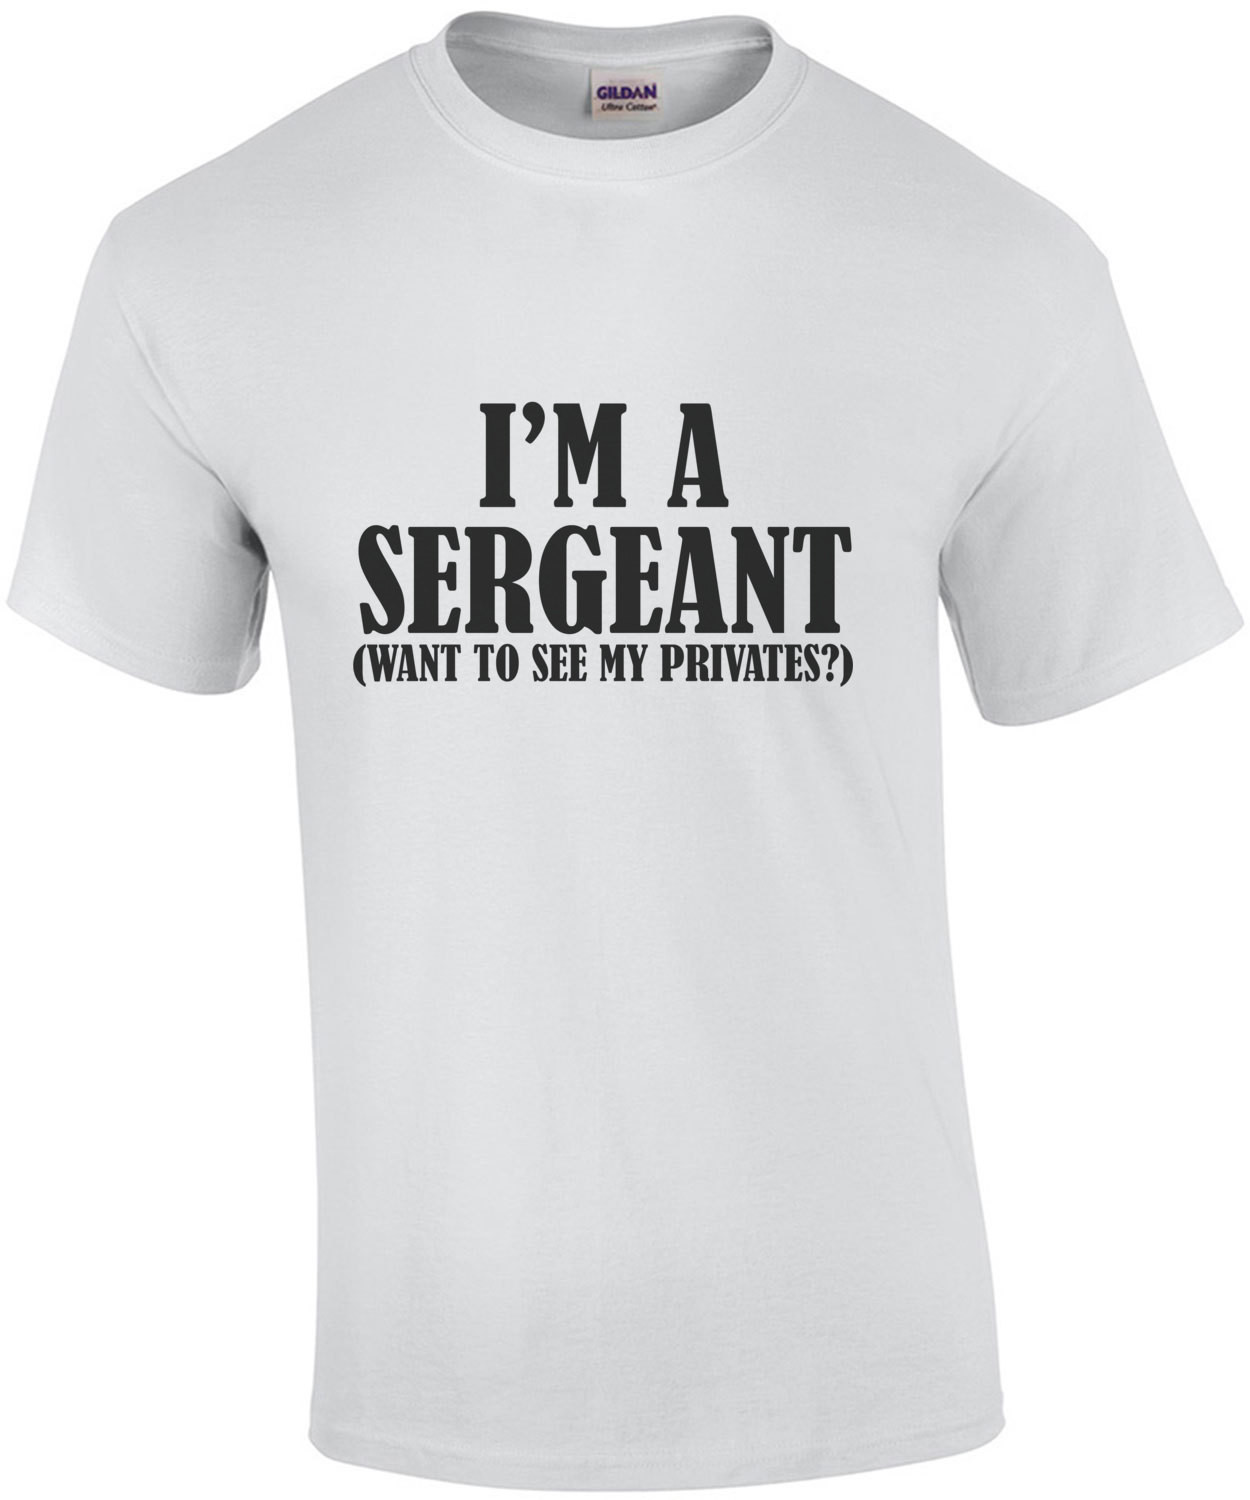 I'm a sergeant (want to see my privates) Sexual T-Shirt